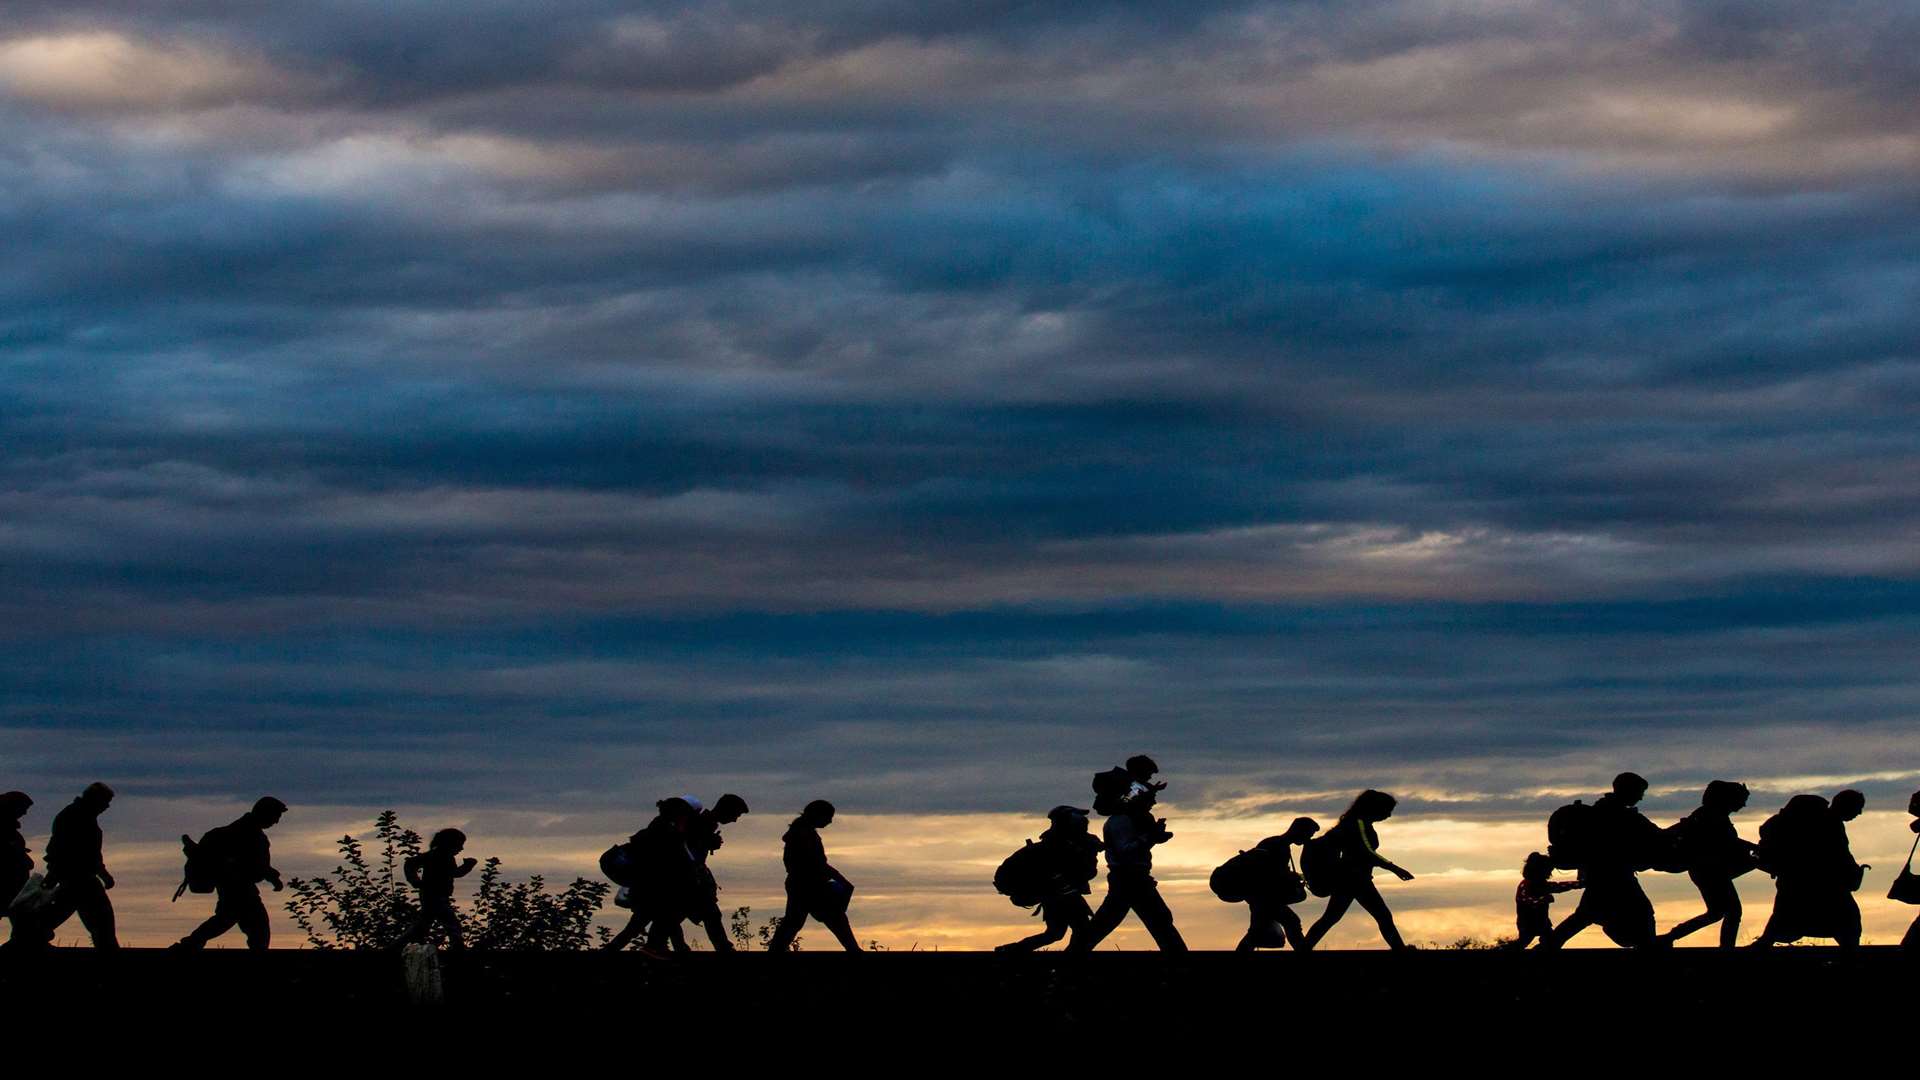 Migrants walk along a railway line after crossing the border into Roszke, Hungary, from Serbia. Picture: SWNS.com